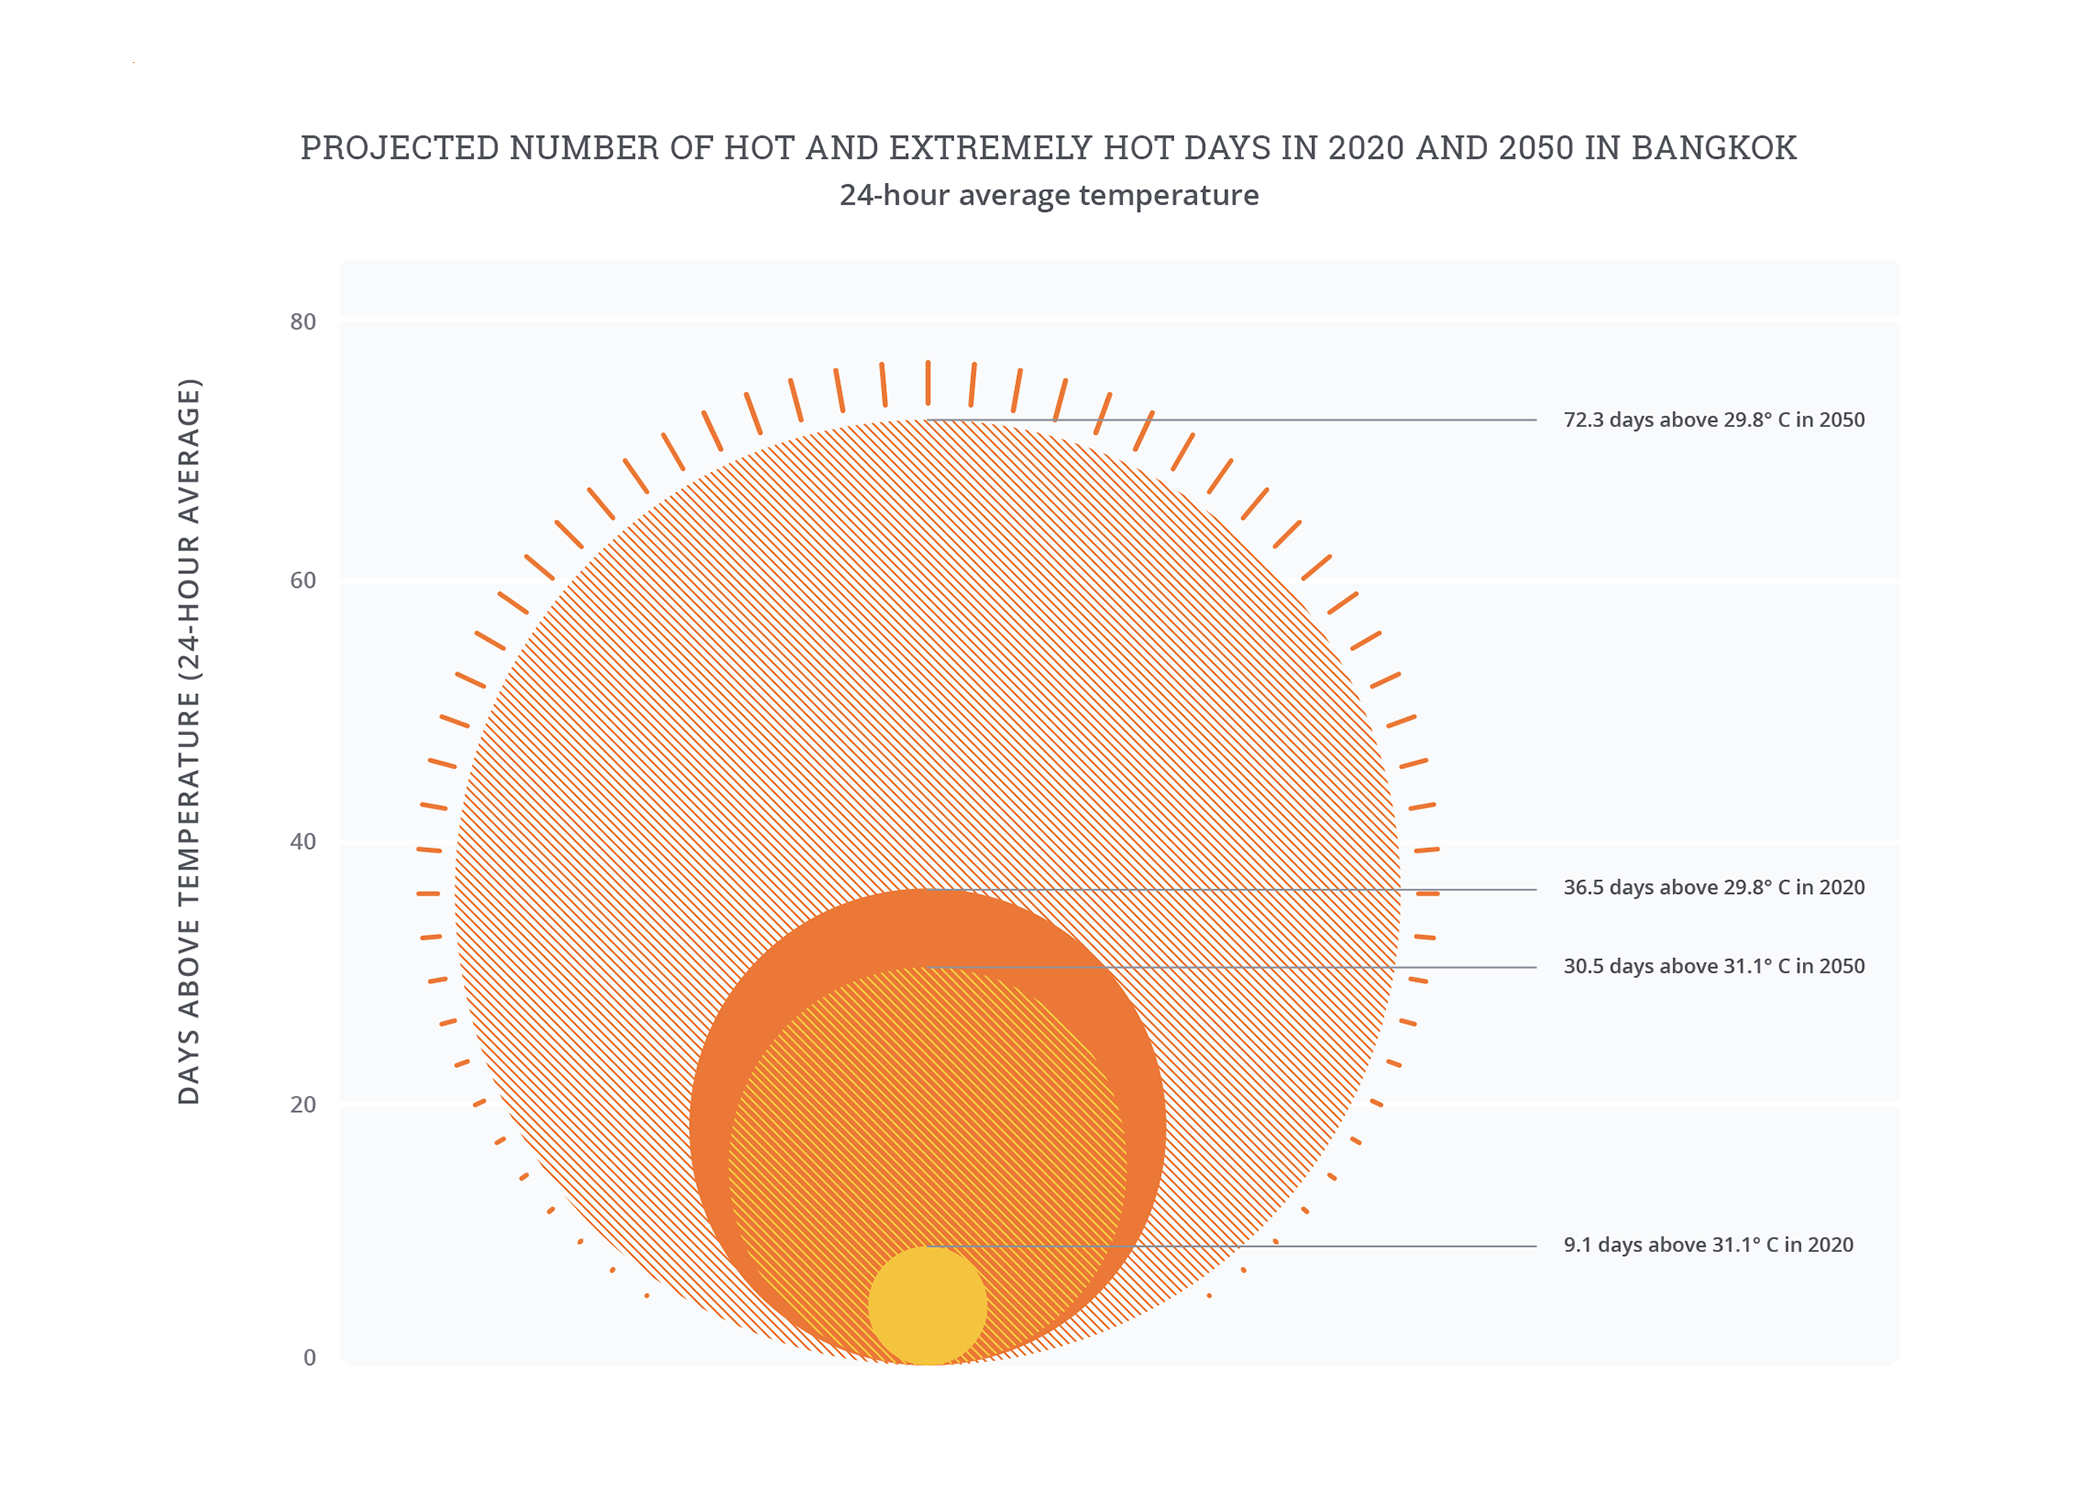 A concentric circle chart of the projected growth in the number of hotand extremely hot days Bangkok experiences per year, between 2020and 2050, shows that we should expect that segment of the yearwhich we consider ‘hot/extremely hot’ to increase 8 fold by 2050.